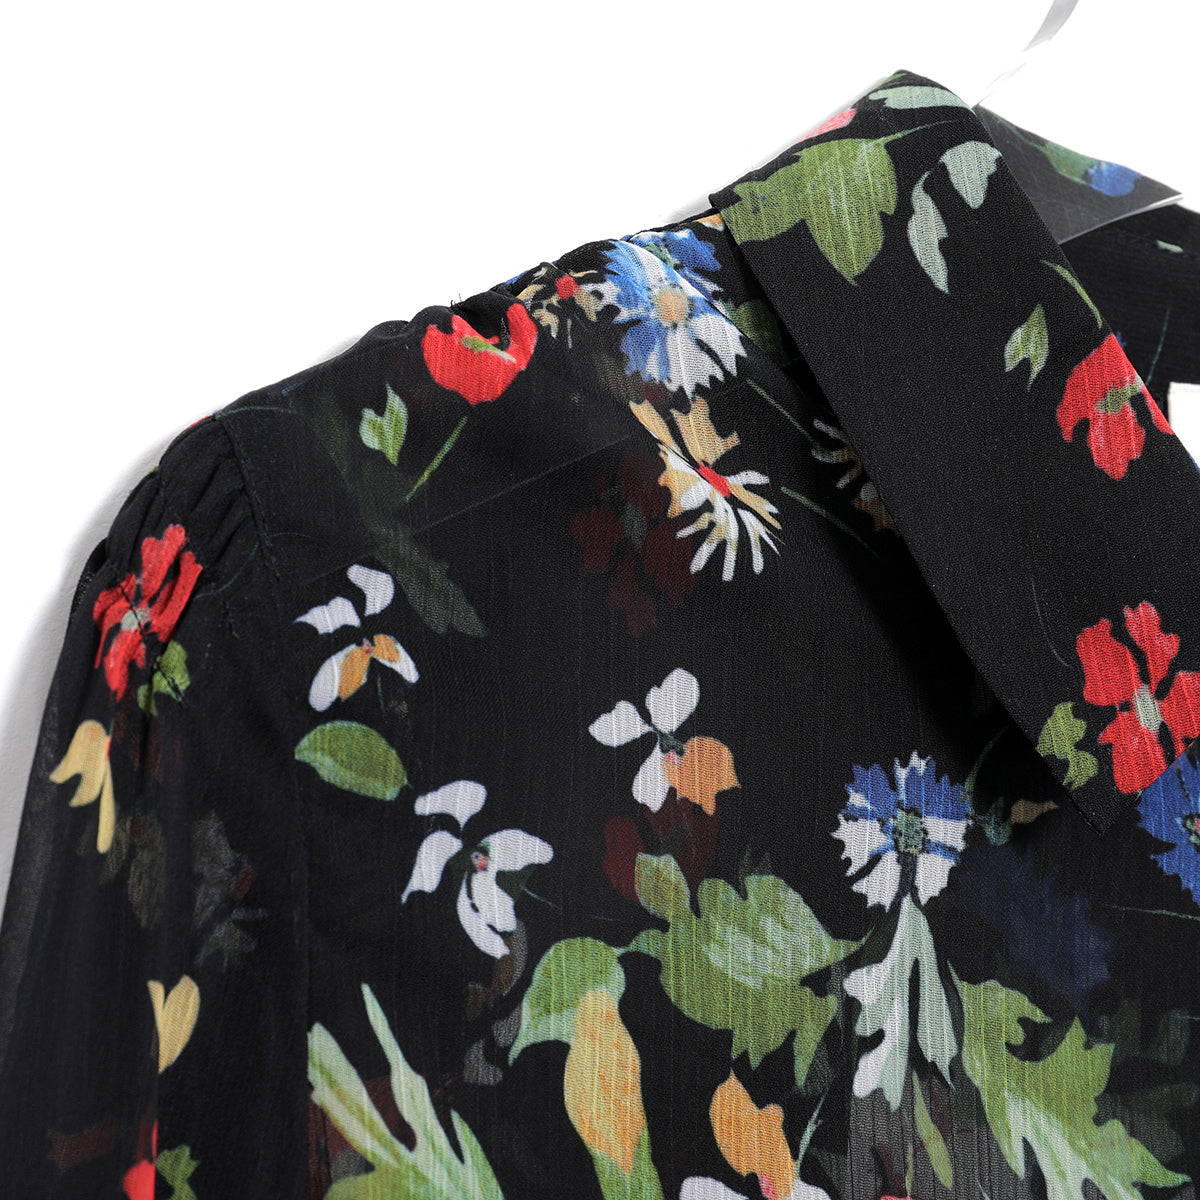 Beach brights with a floral touch: Unleash a burst of color with this floral print beach shirt.